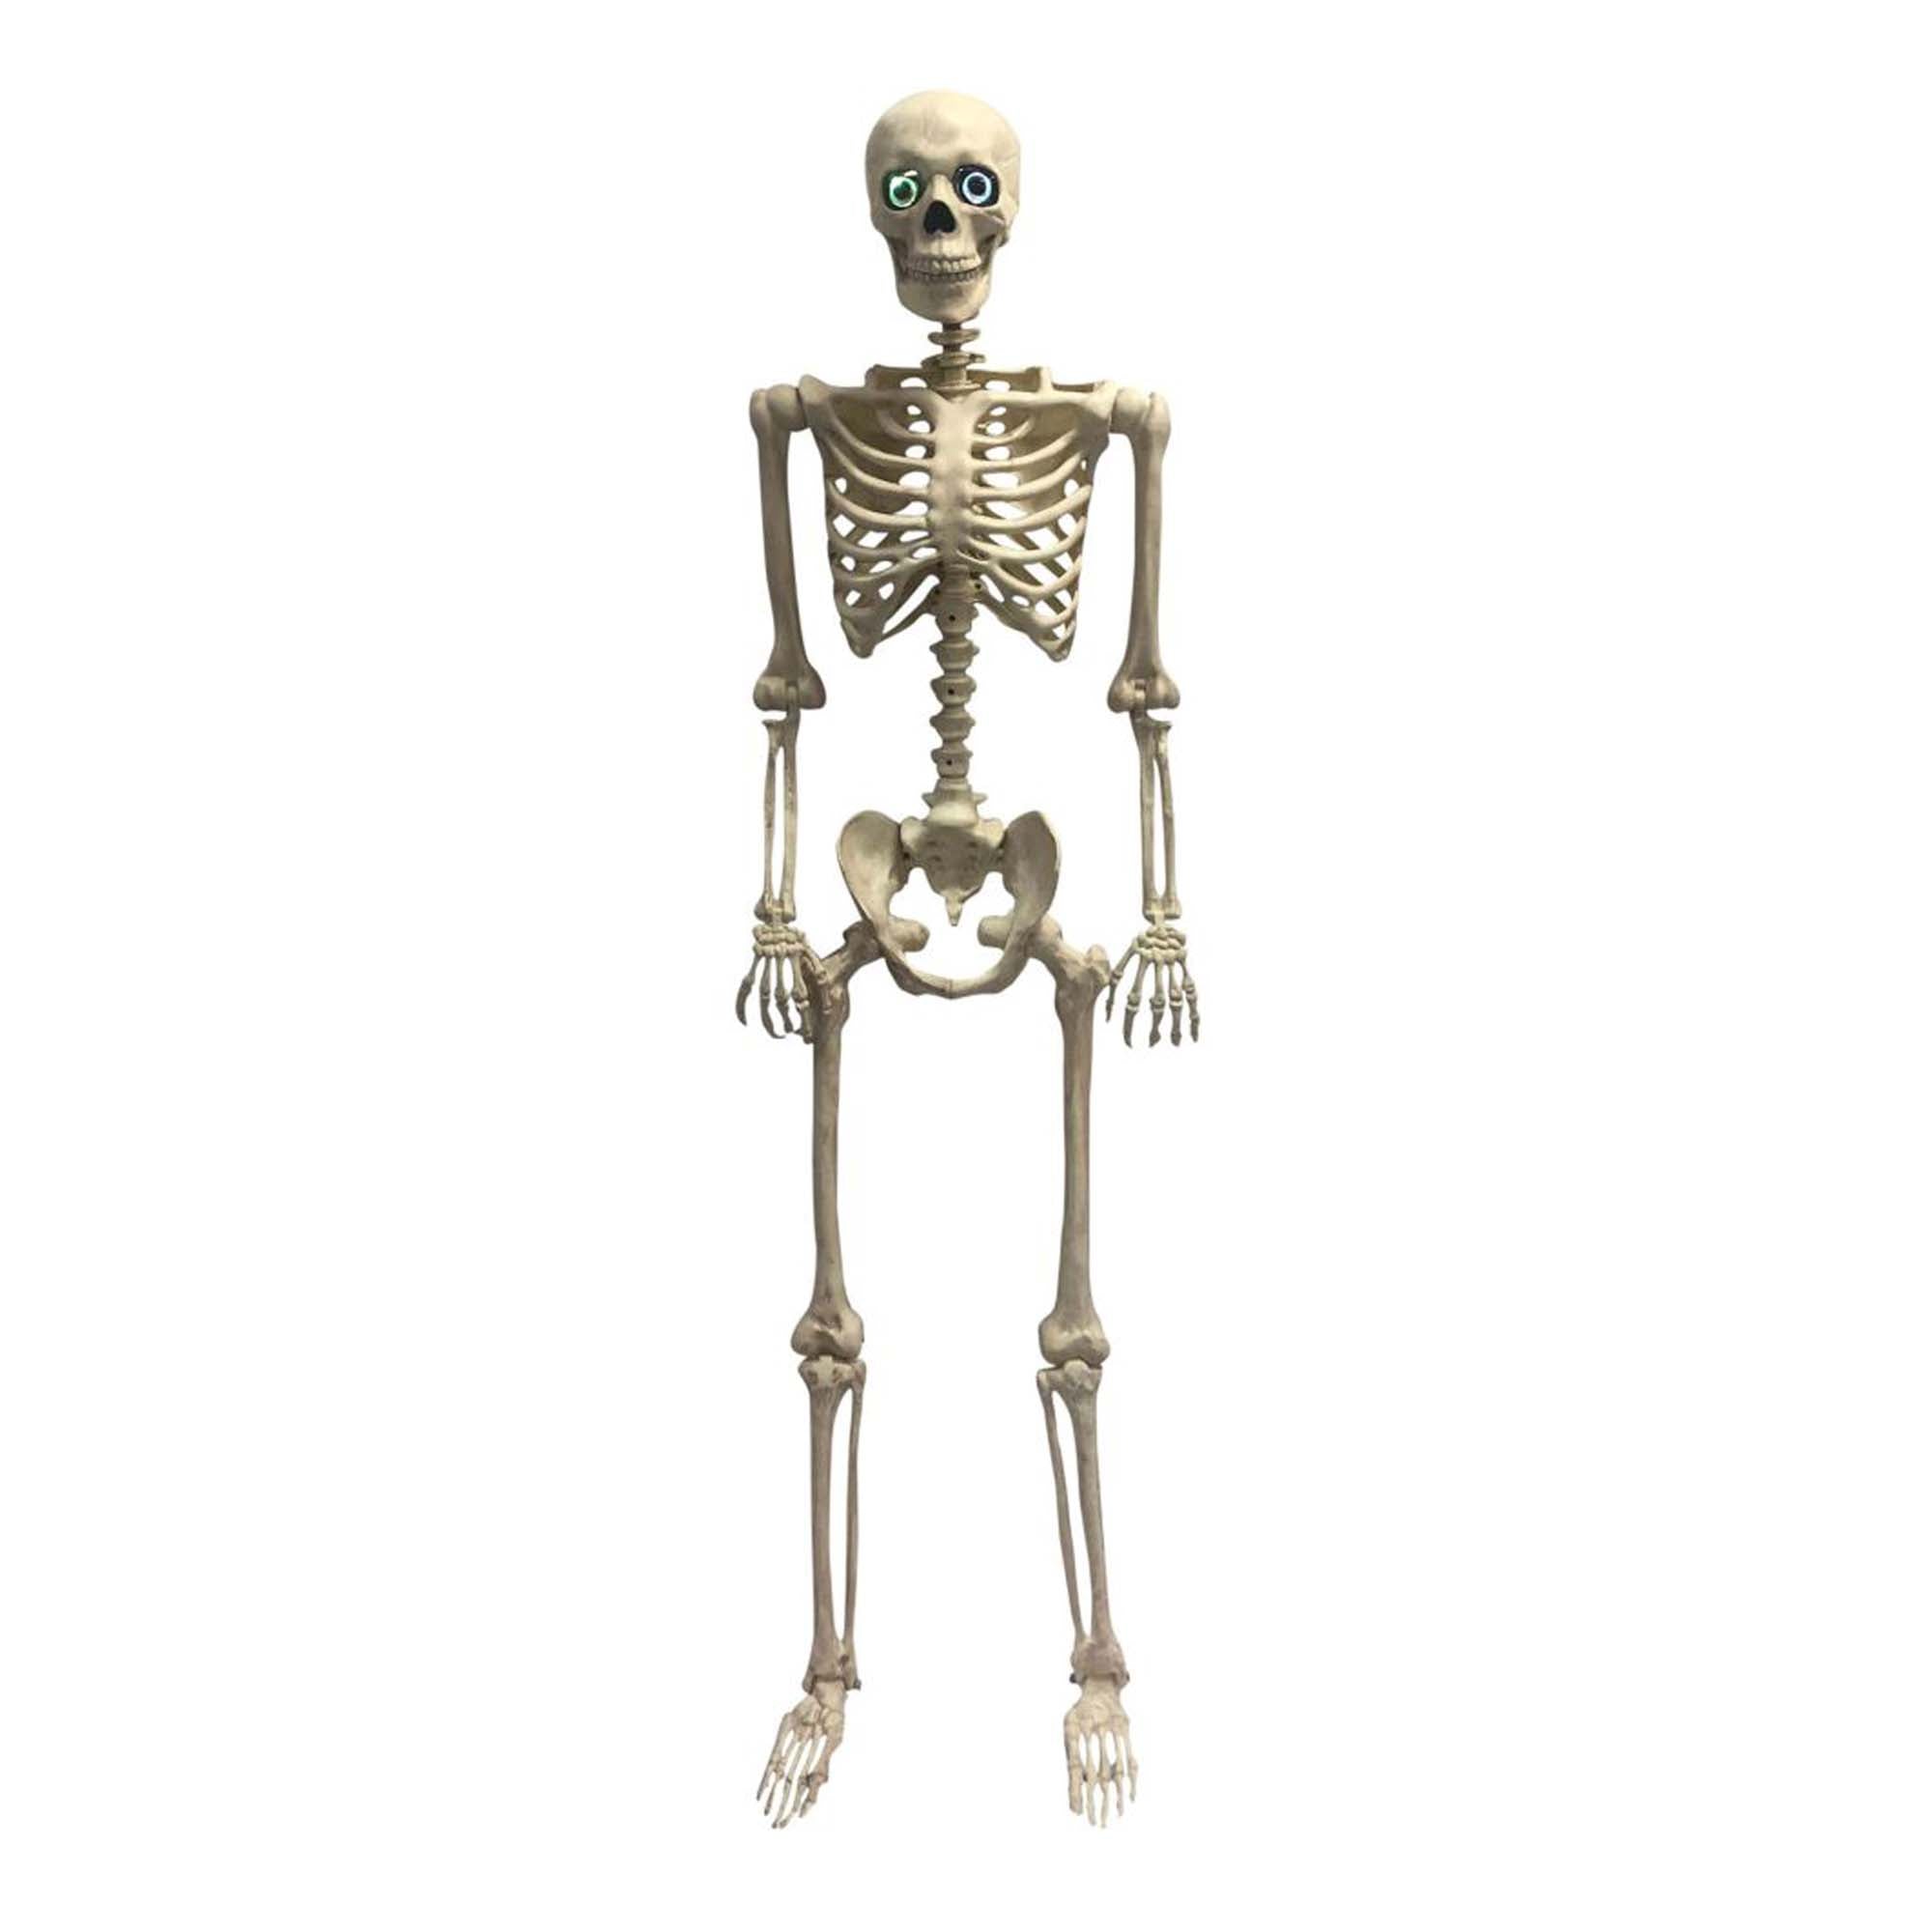 Animated Light-Up Skeleton, 36 Inches, 1 Count